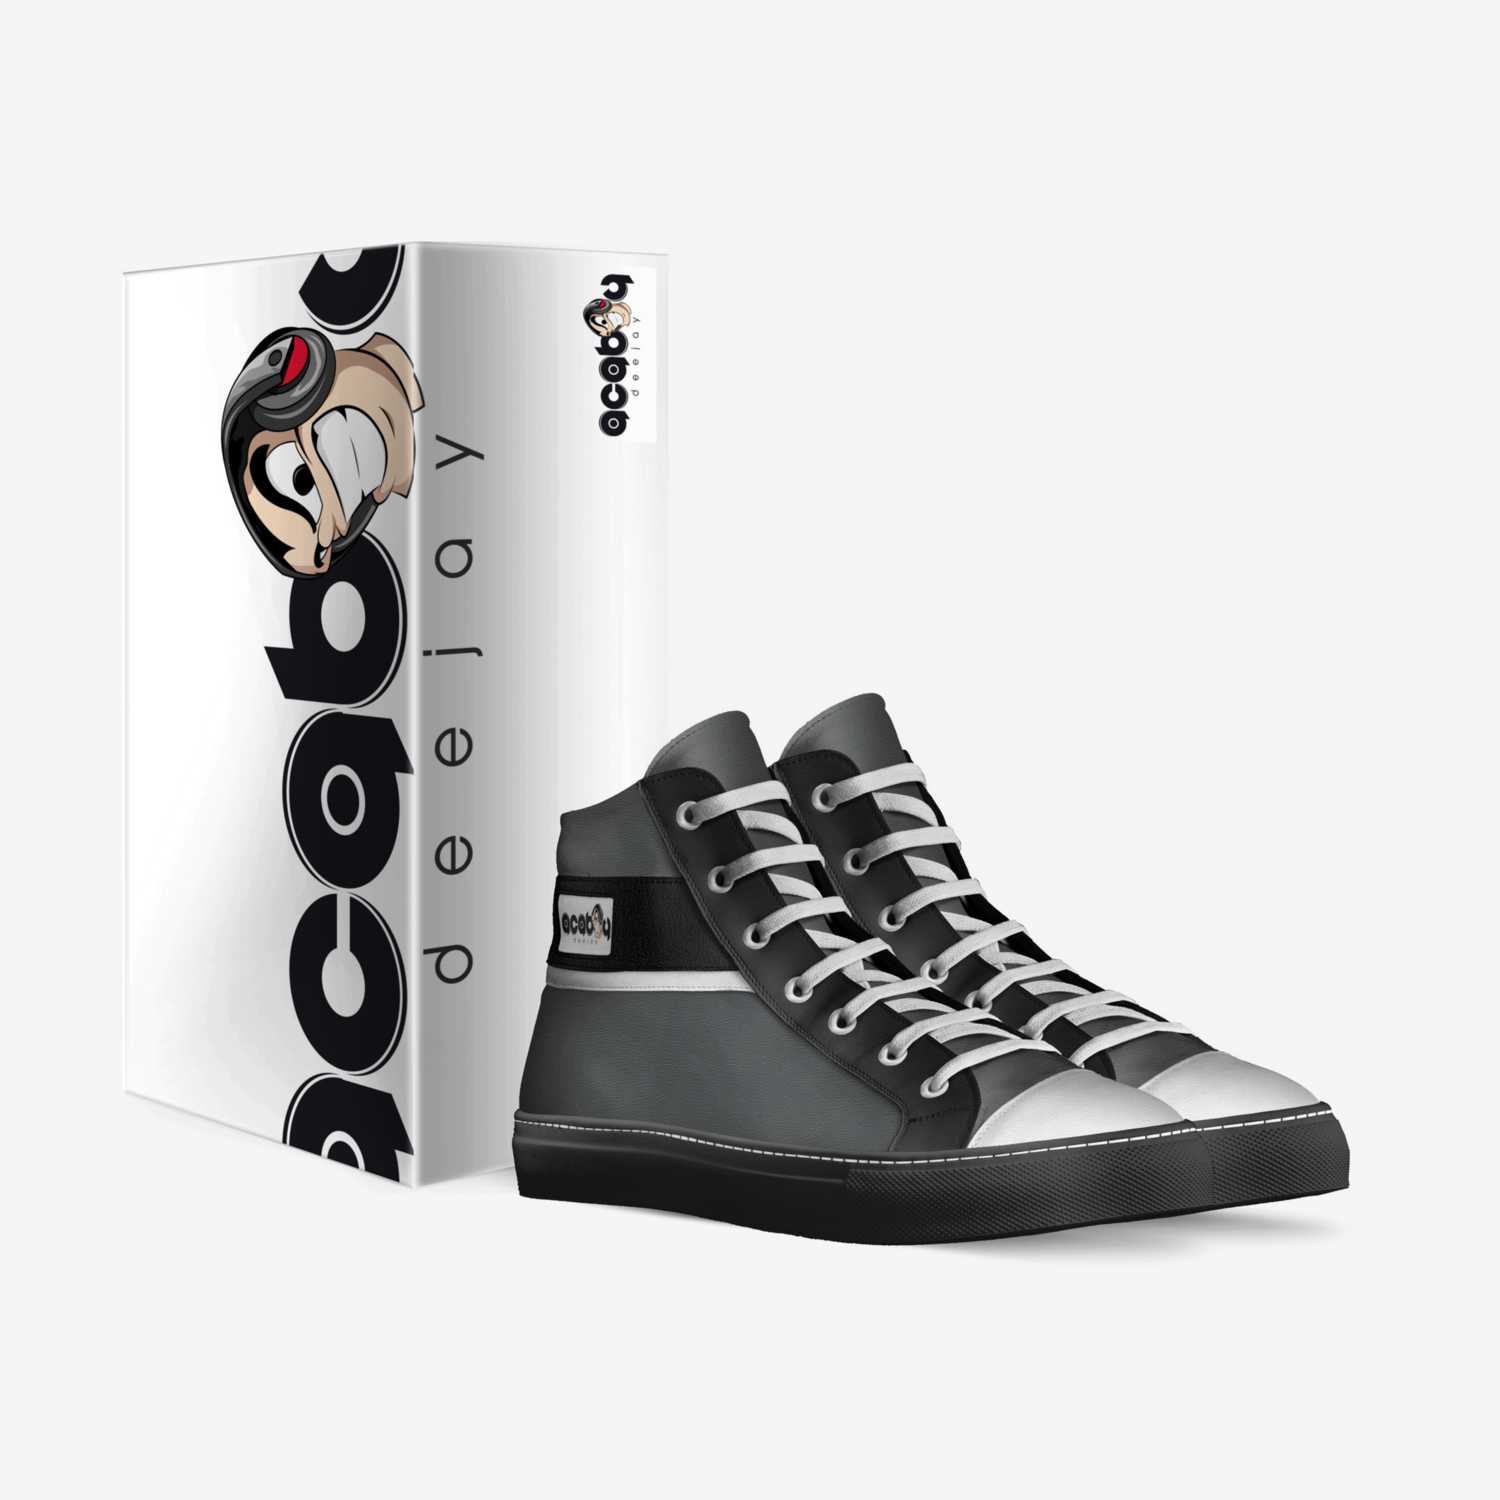 acaboy custom made in Italy shoes by Jose Iturbe | Box view